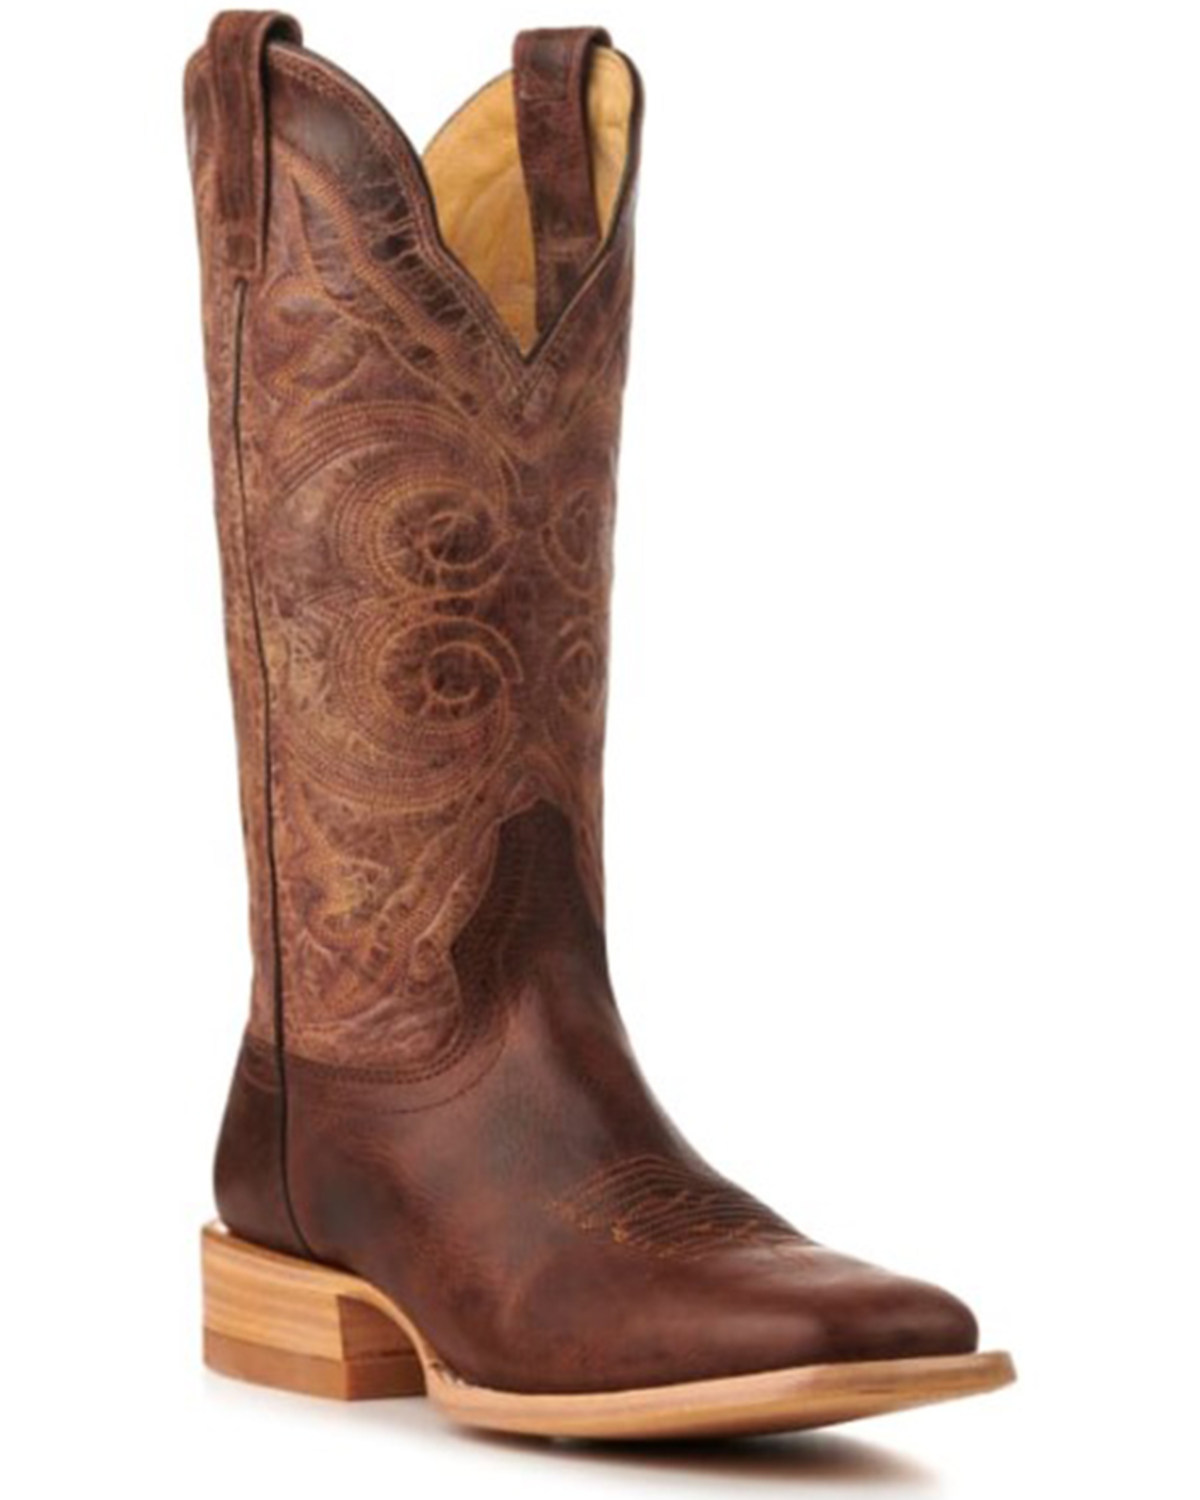 Hondo Boots Men's Cowhide Western - Broad Square Toe